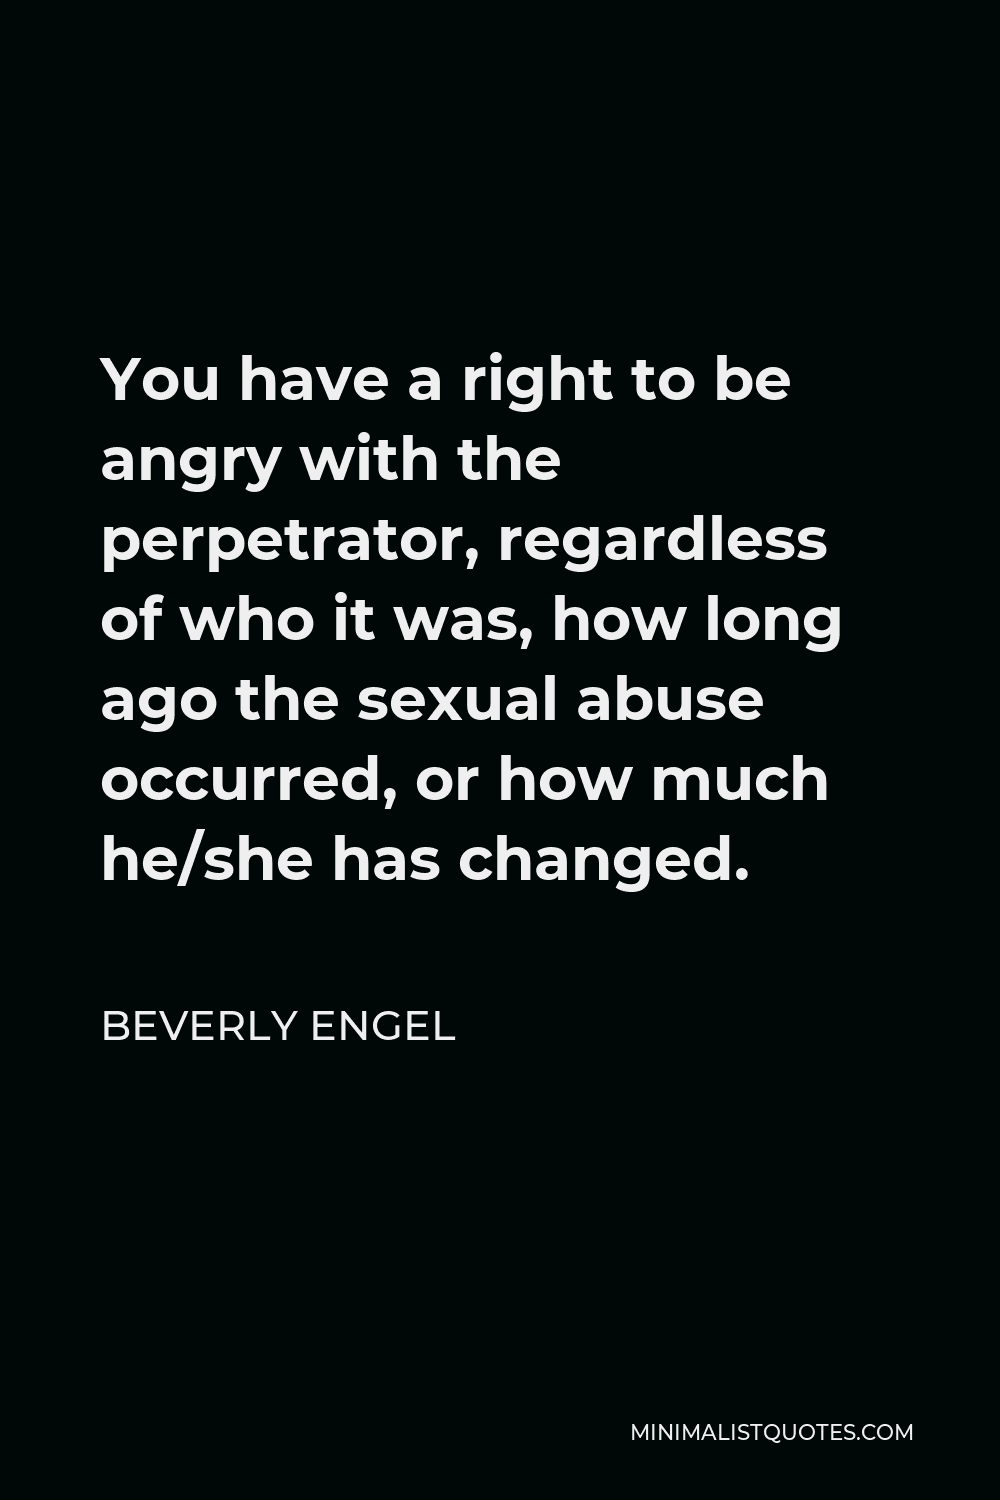 Beverly Engel Quote - You have a right to be angry with the perpetrator, regardless of who it was, how long ago the sexual abuse occurred, or how much he/she has changed.